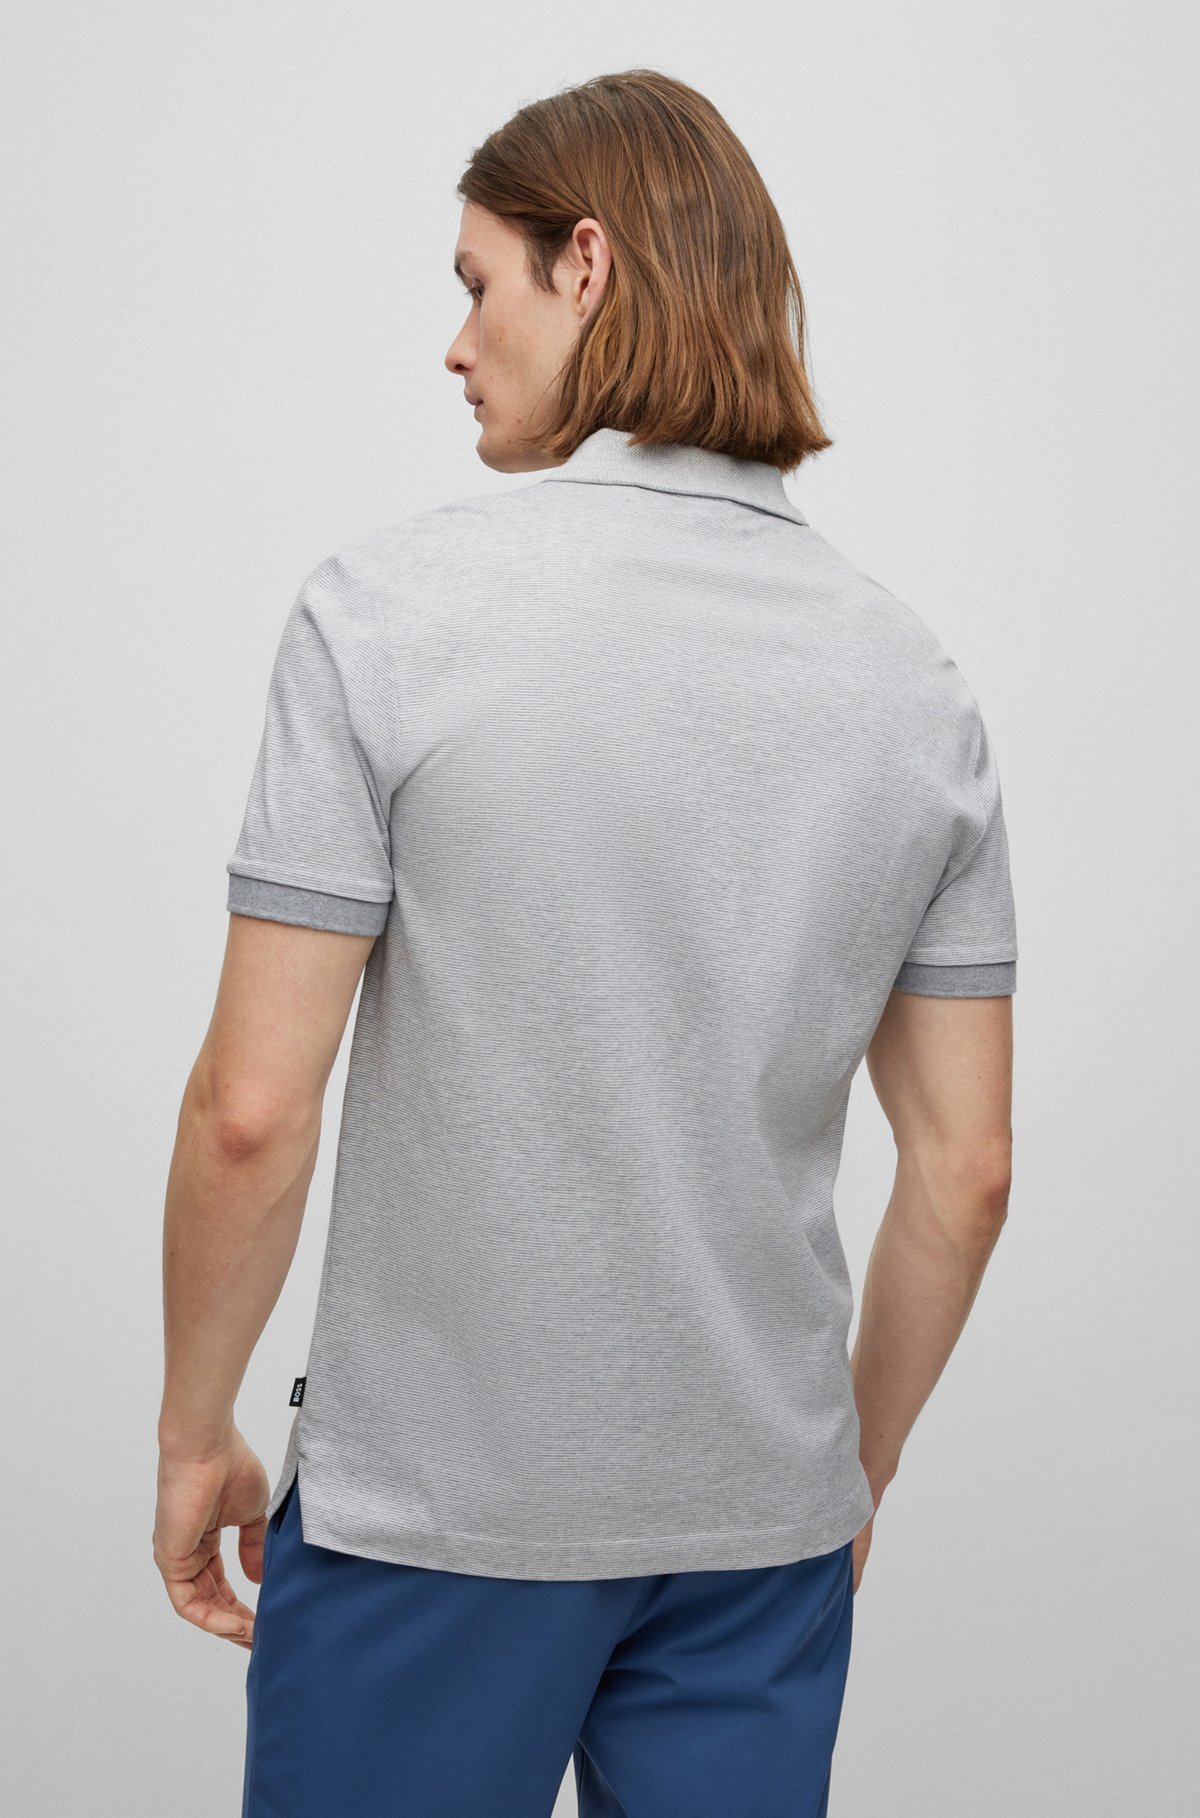 Regular-fit polo shirt with two-tone micro pattern, Silver